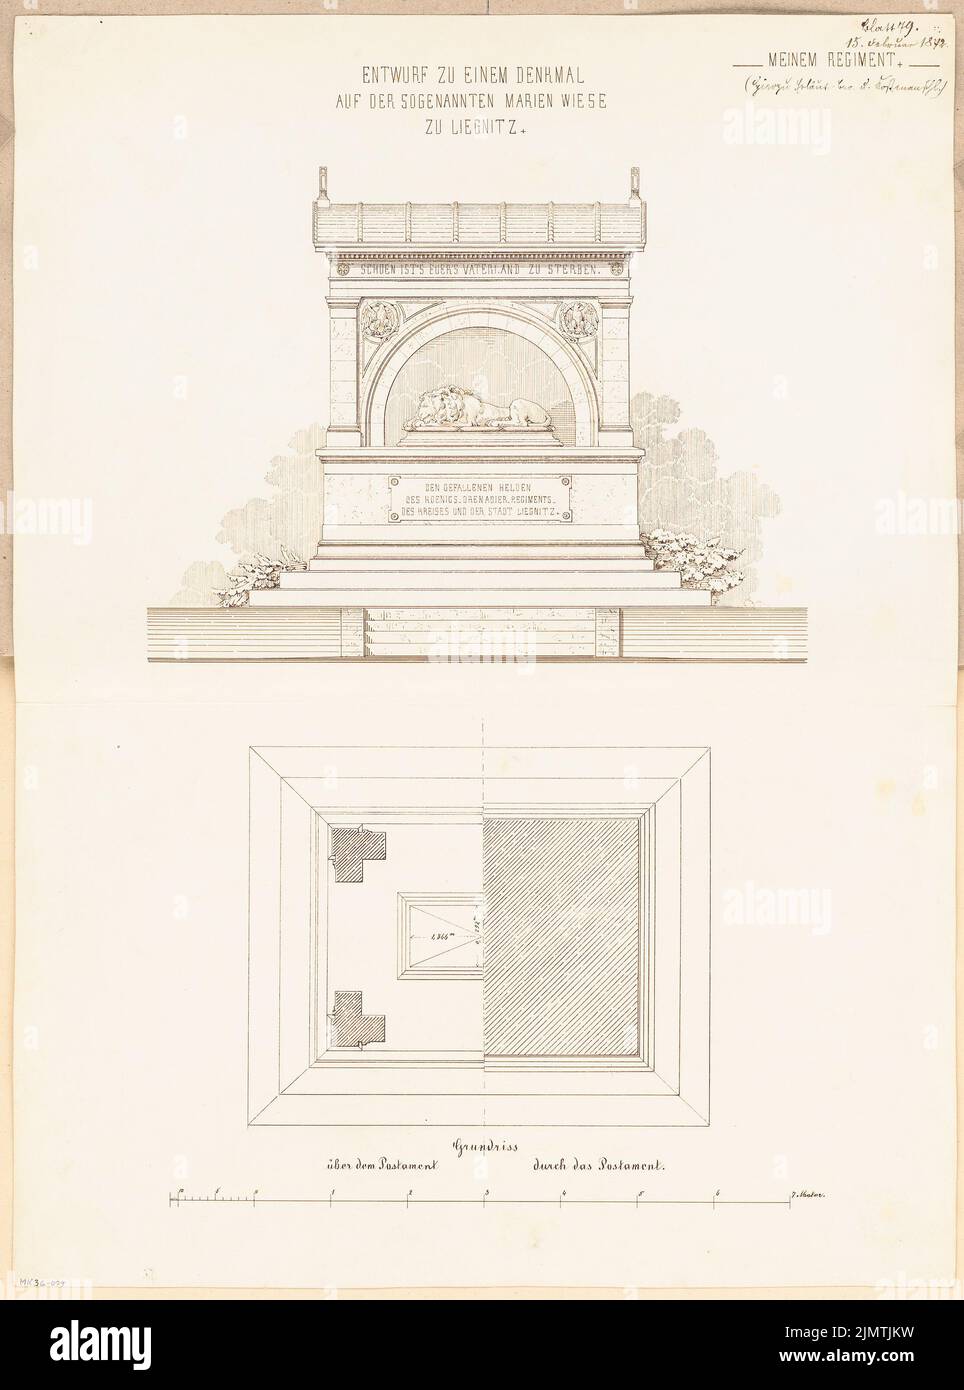 Unknown architect, a fallen monument in Liegnitz. Monthly competition February 1872 (02.1872): floor plan in 2 levels, tort side view; Scale bar. Ink on cardboard, 67.6 x 50.1 cm (including scan edges) N.N. : Gefallenendenkmal, Liegnitz. Monatskonkurrenz Februar 1872 Stock Photo